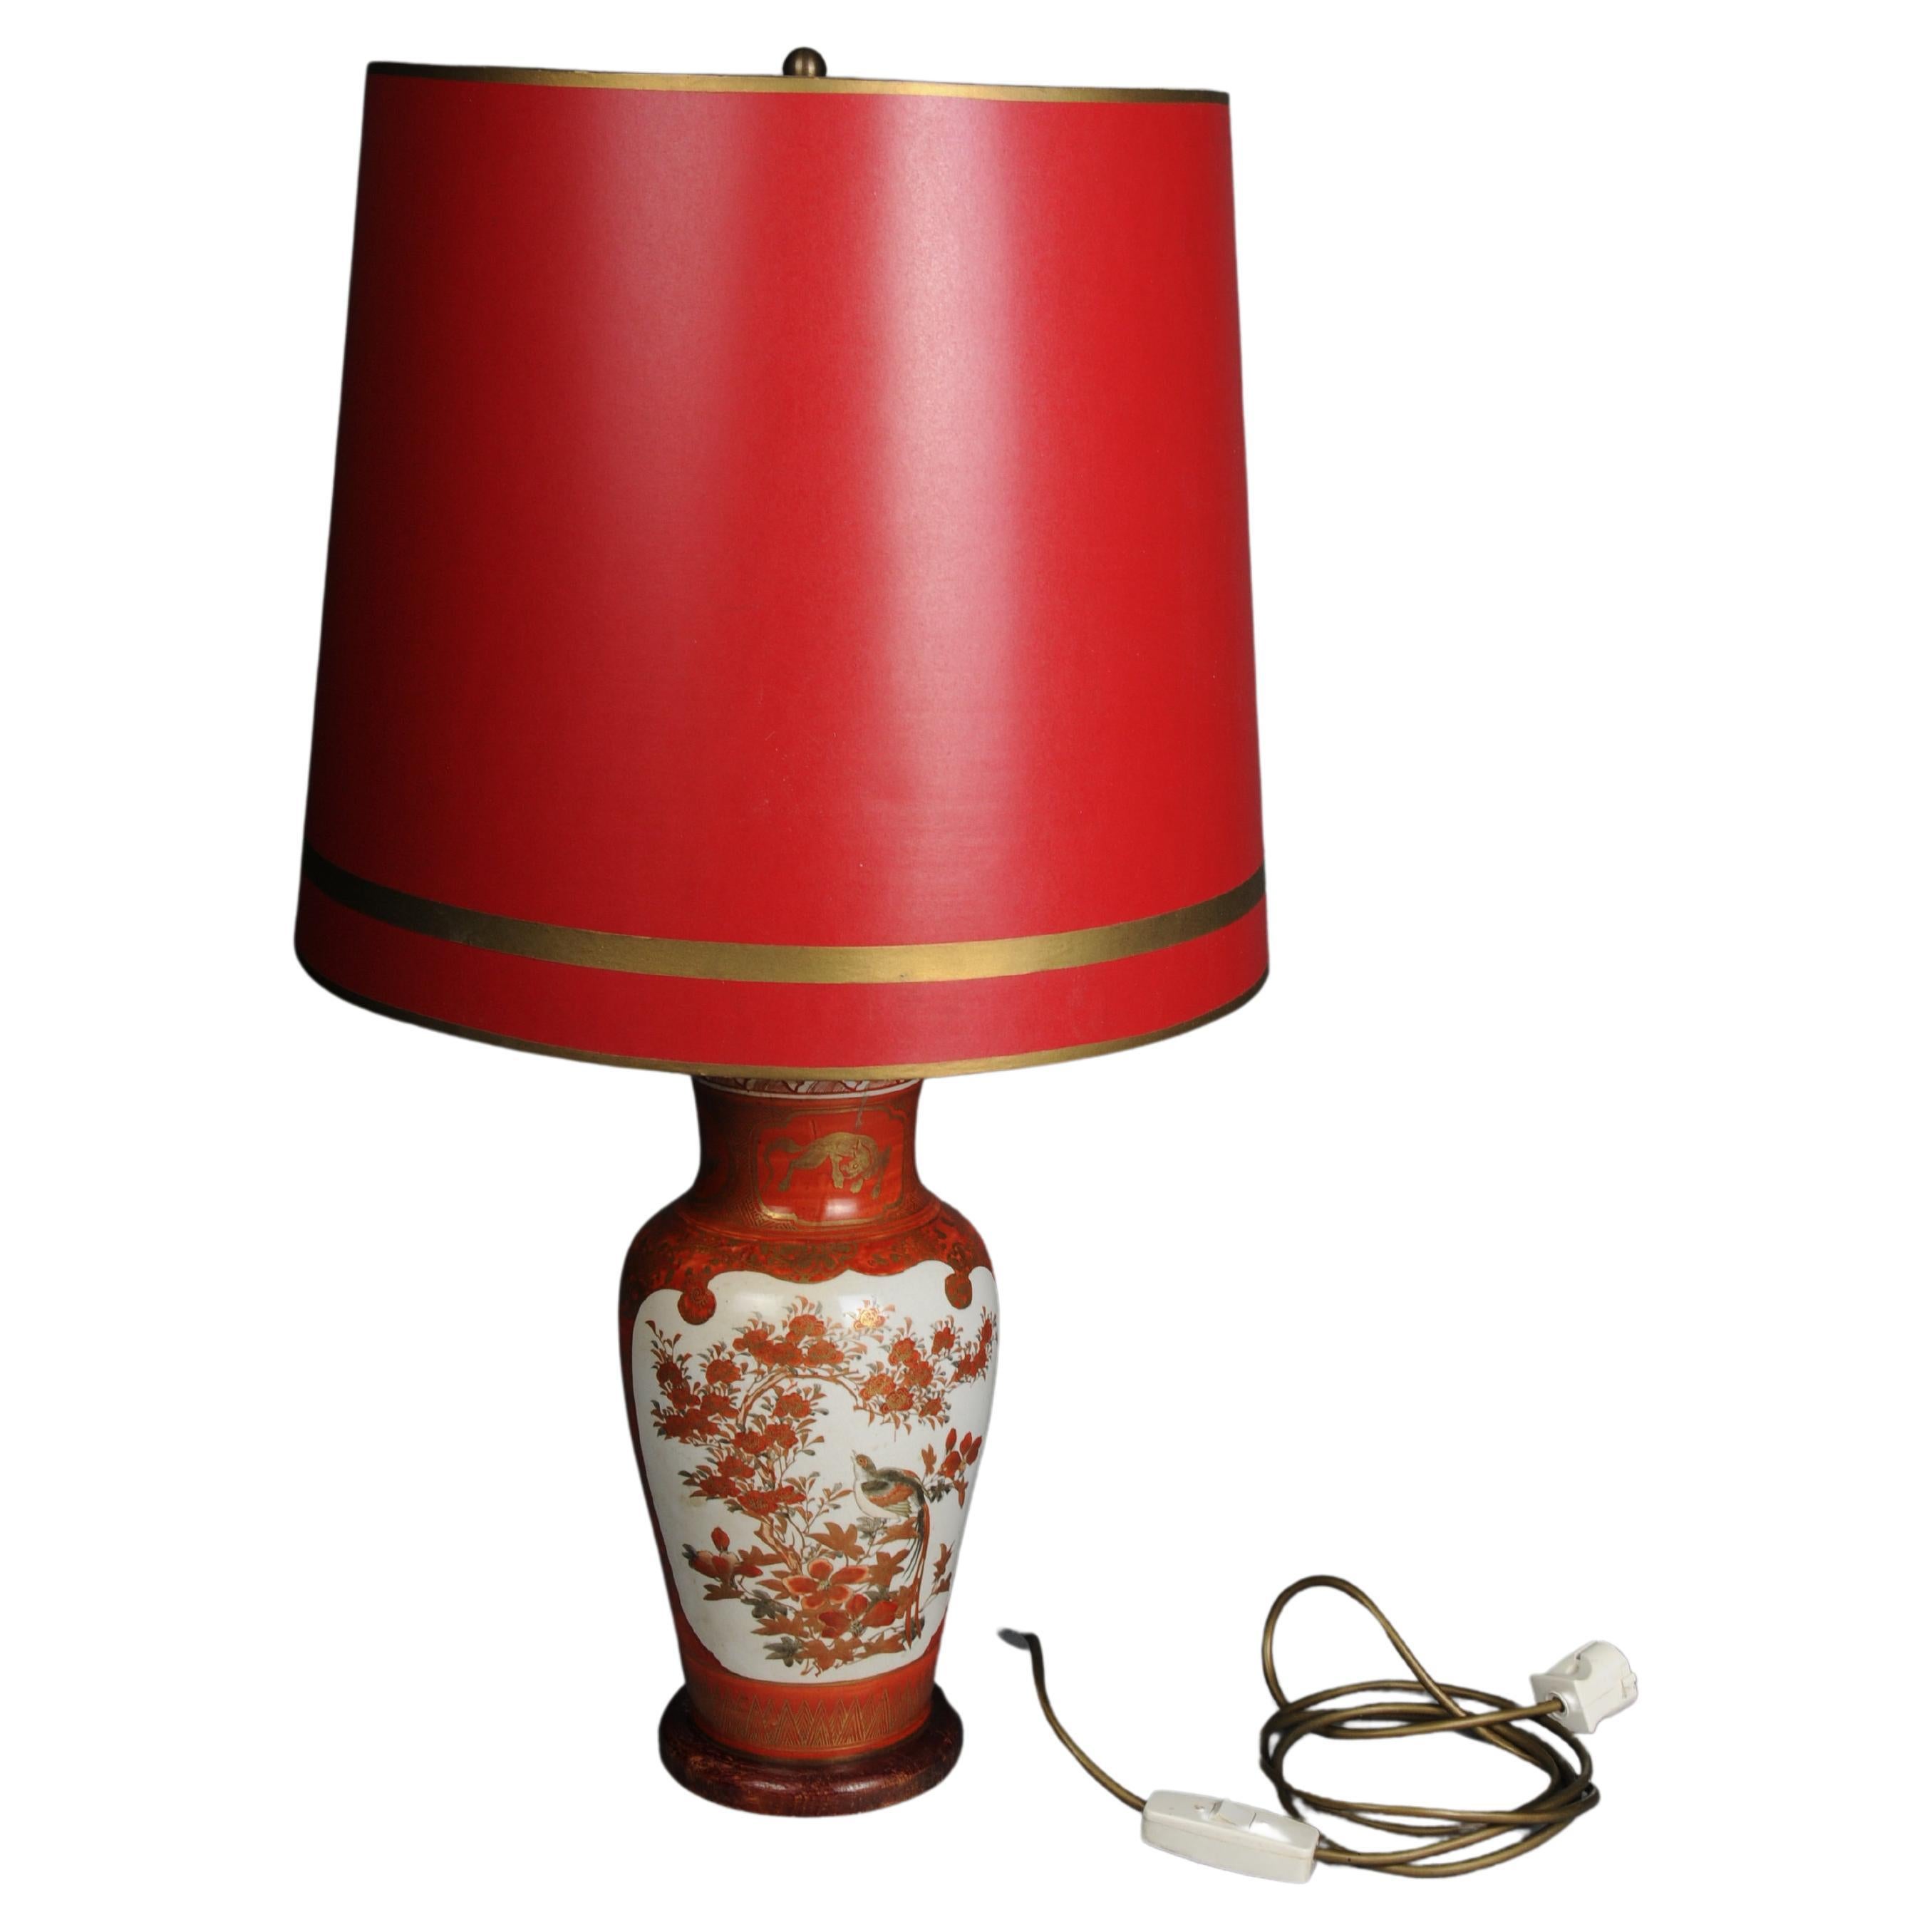 Old Asian porcelain table lamp, red with shade, electrified For Sale